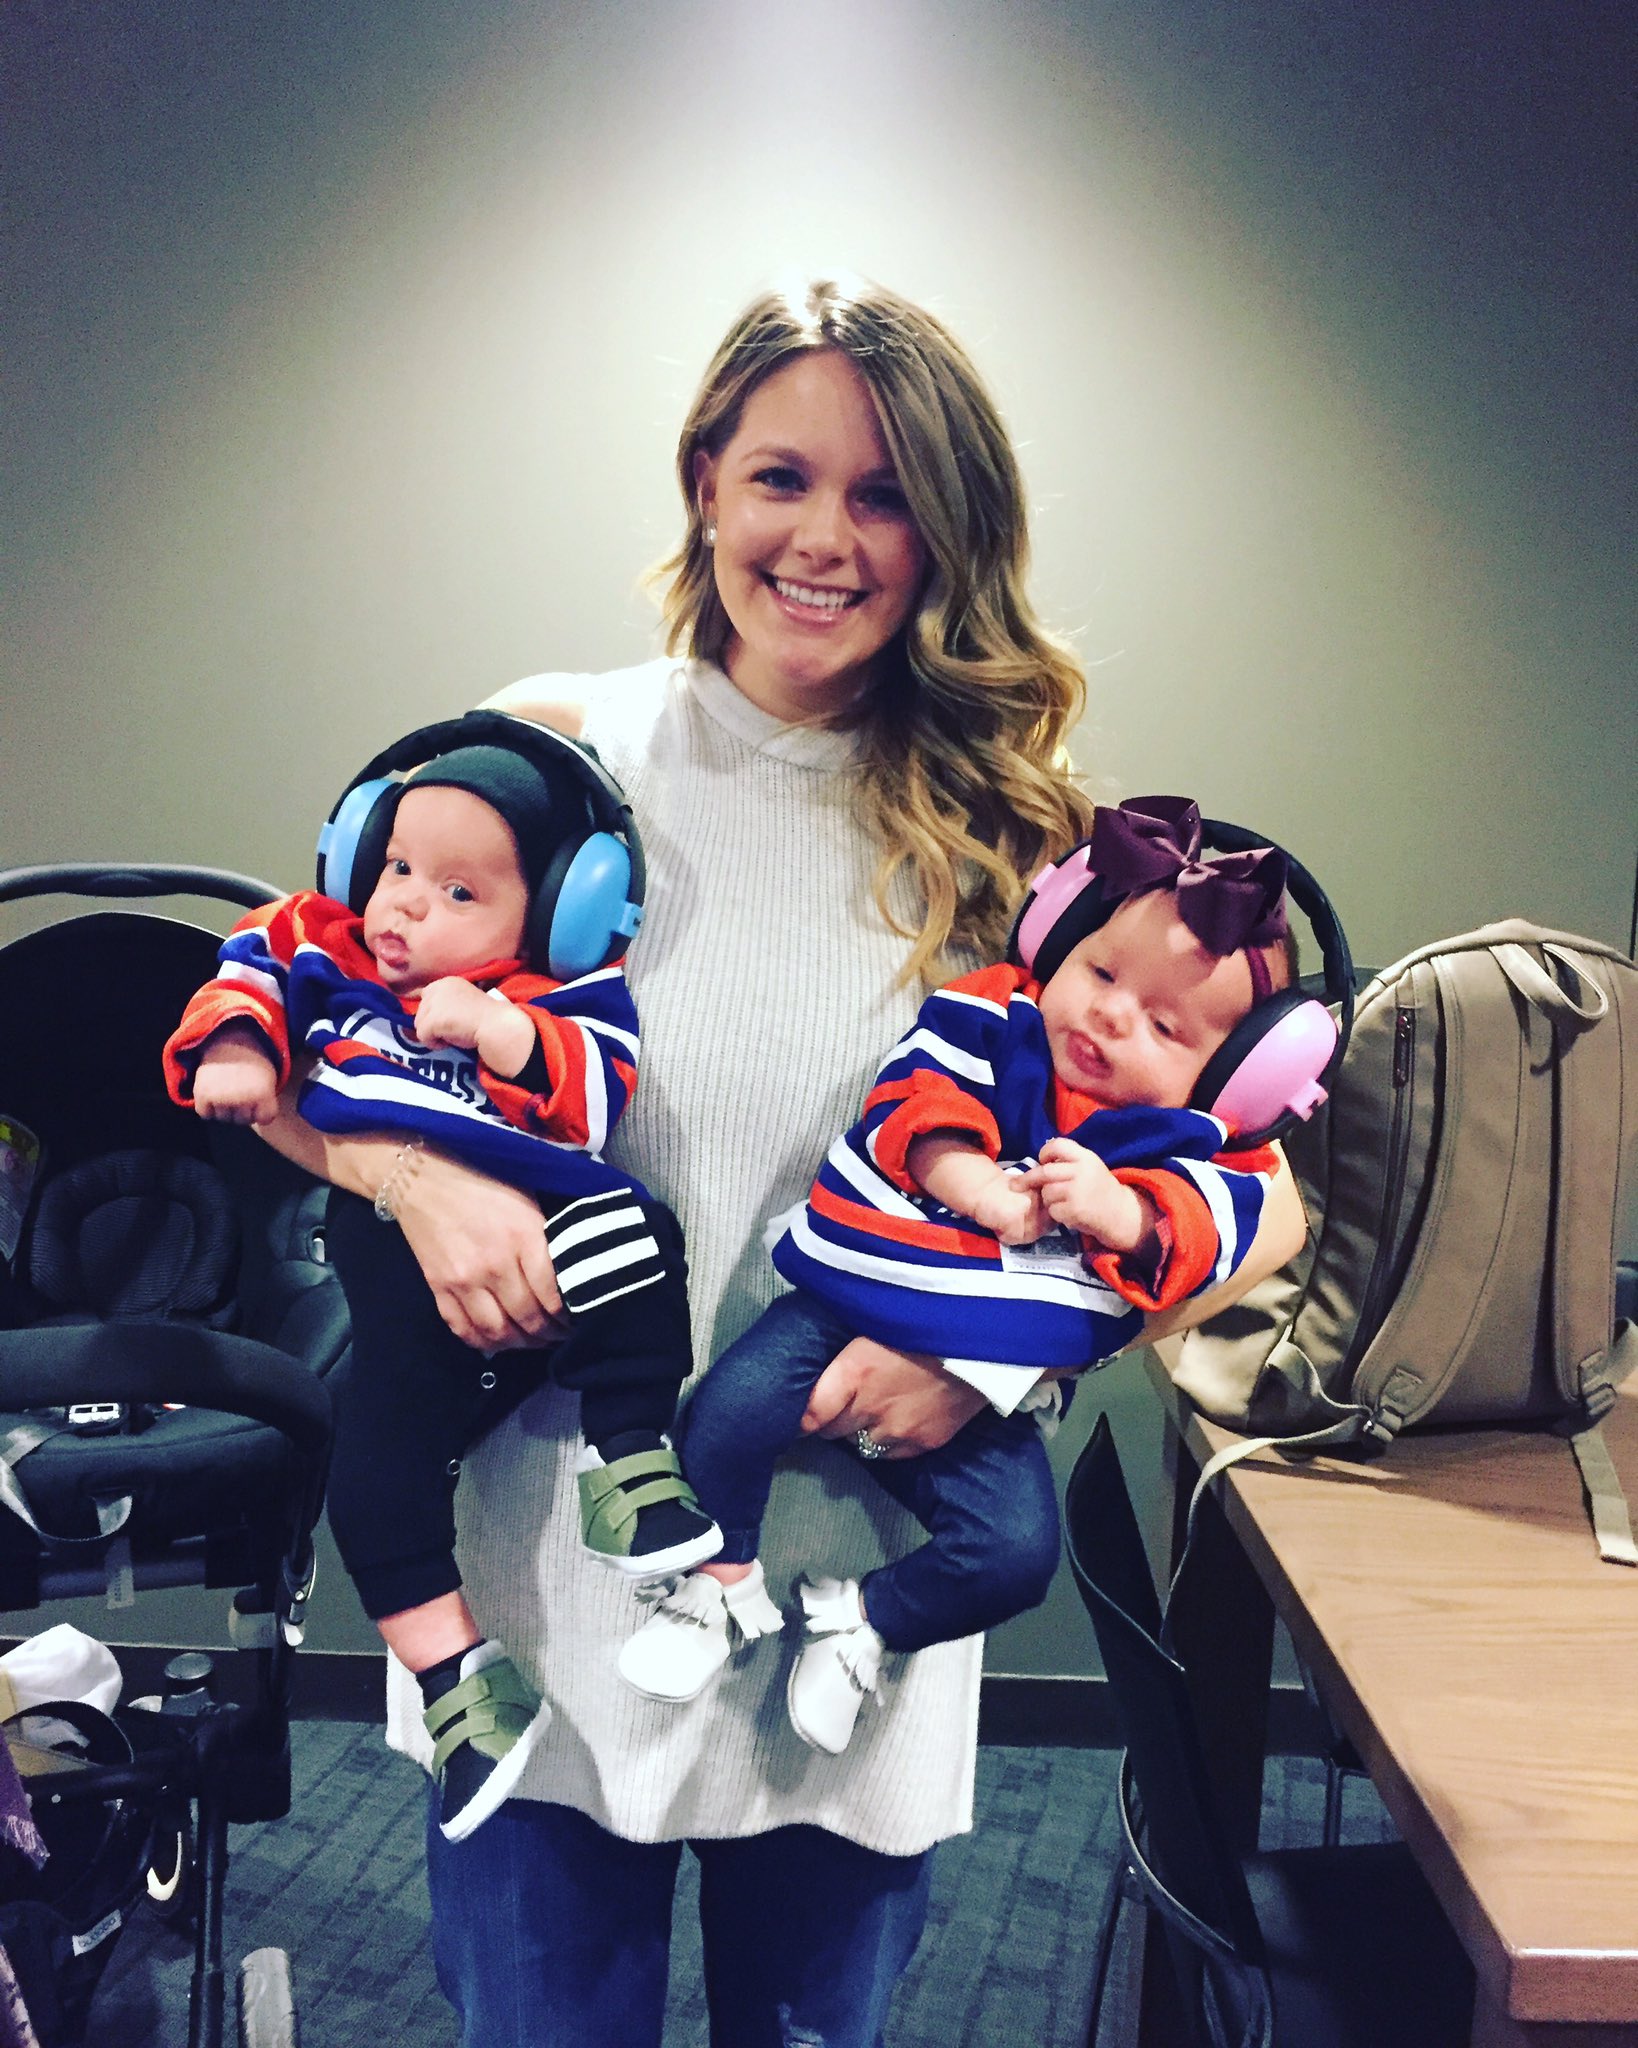 Cam Talbot on X: Great night to have our twins at their first